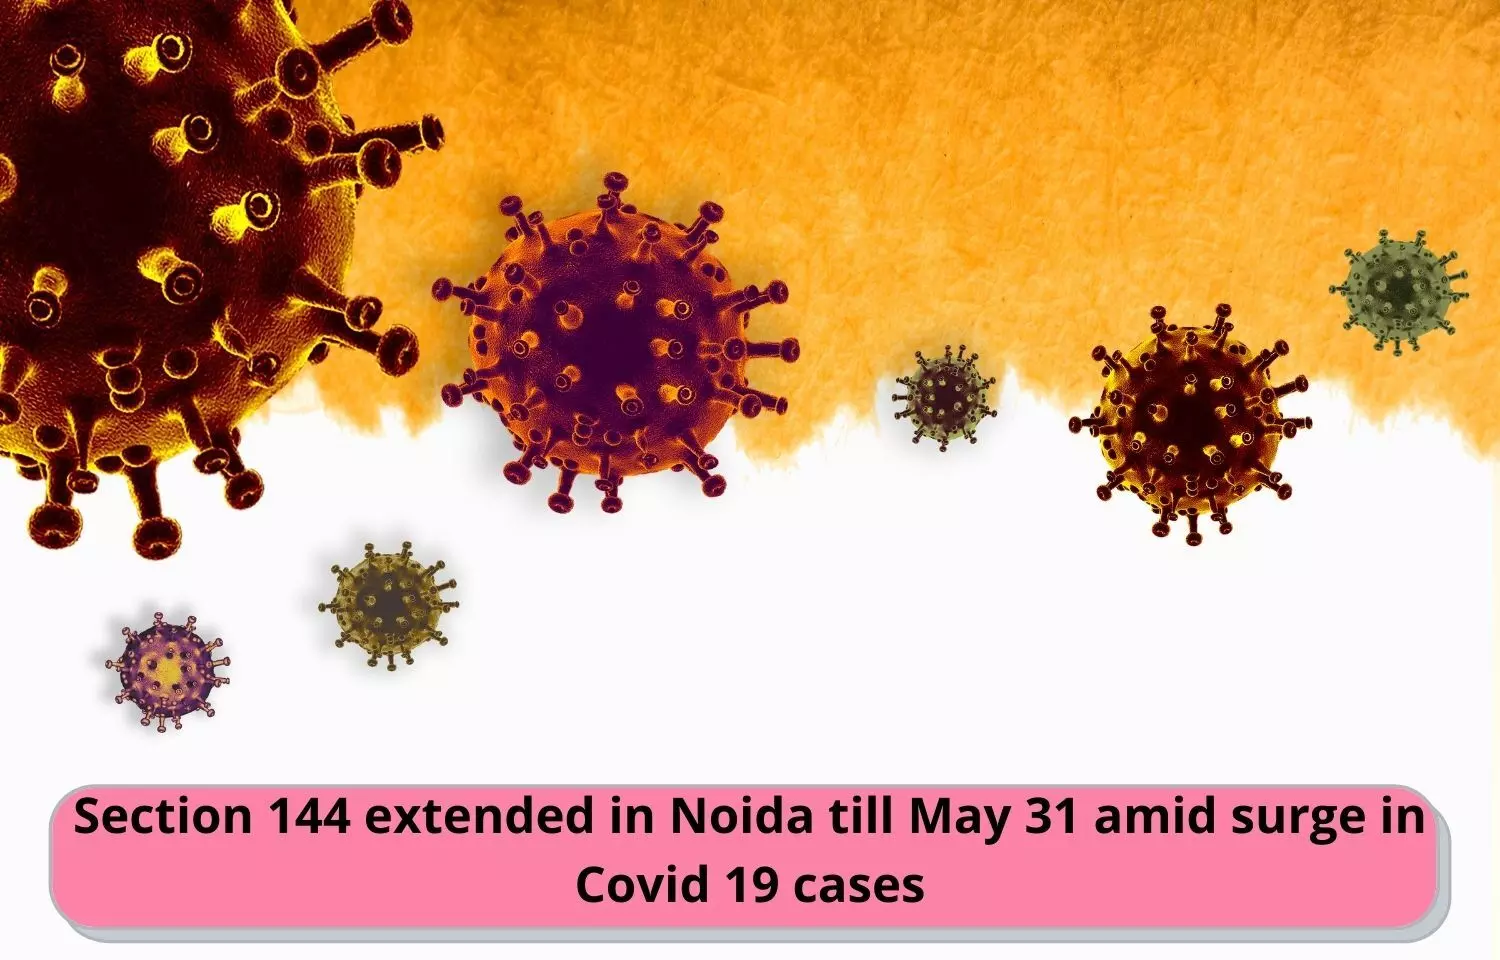 Section 144 extended in Noida till May 31 amid surge in Covid 19 cases